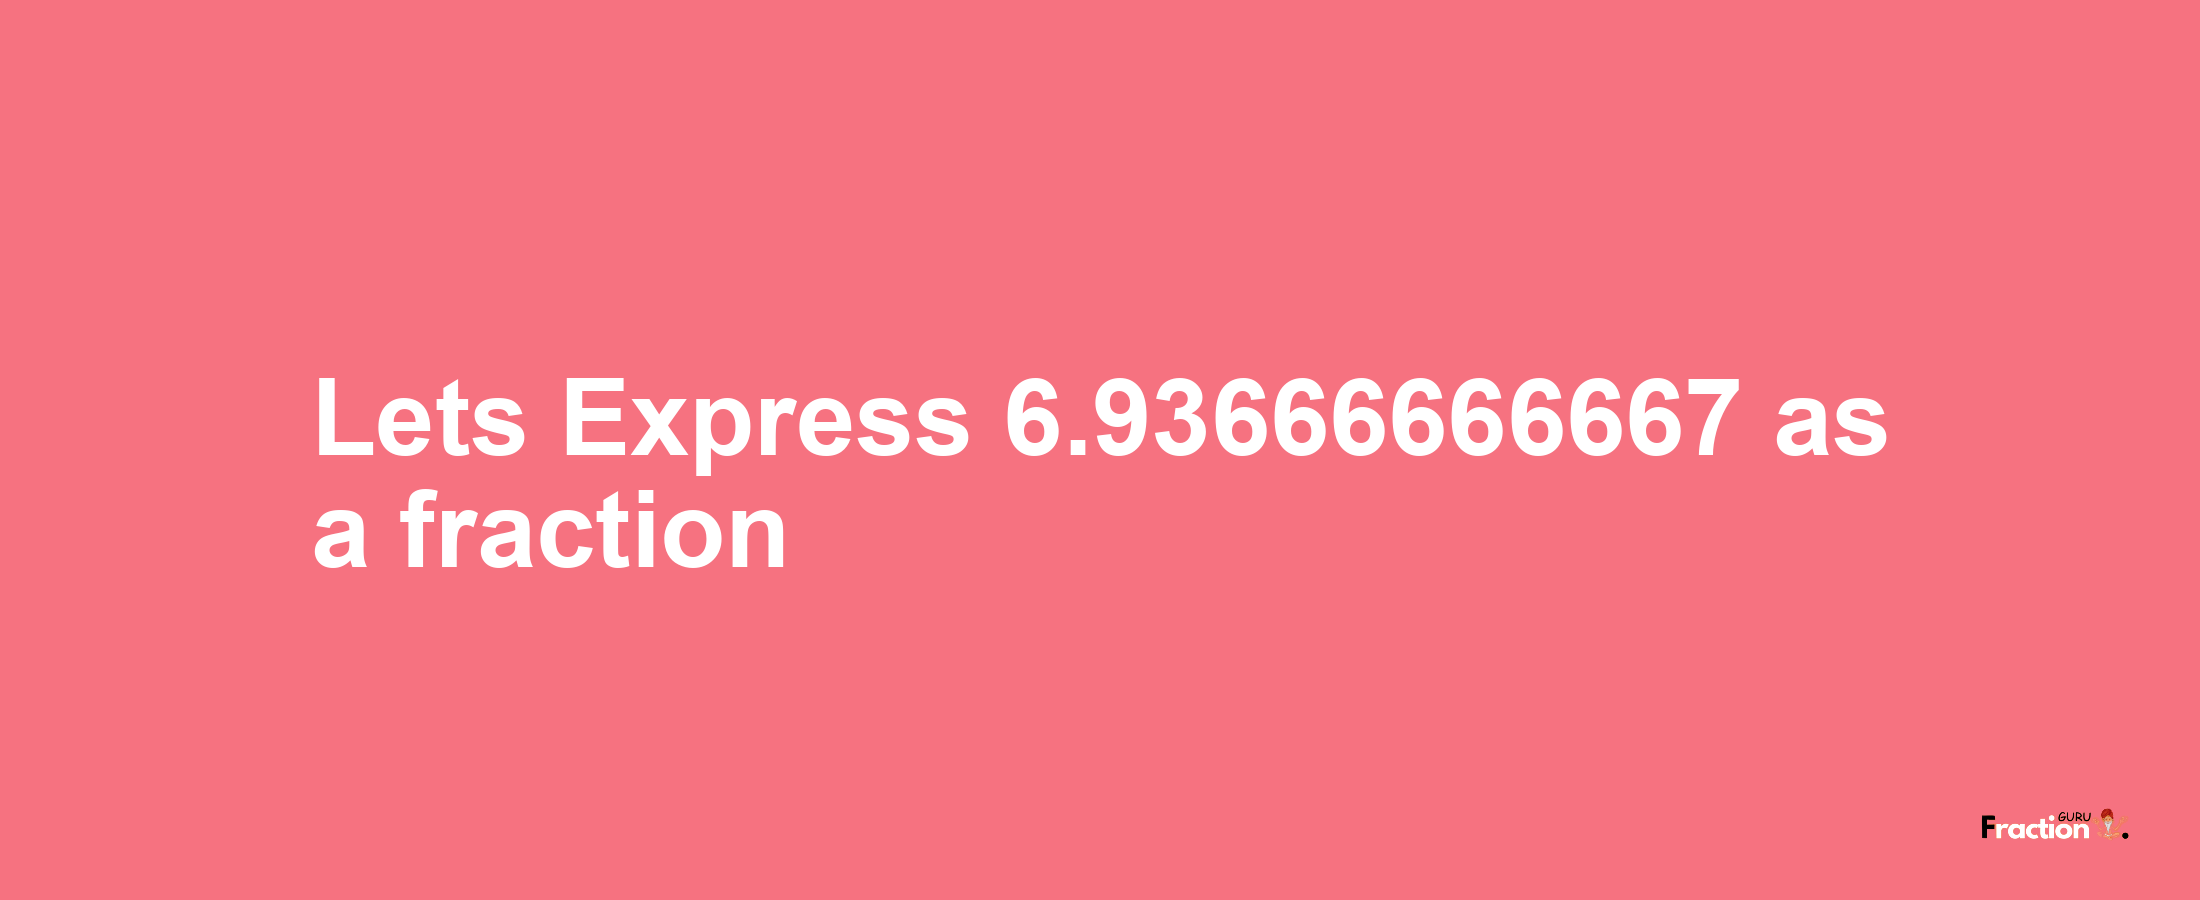 Lets Express 6.93666666667 as afraction